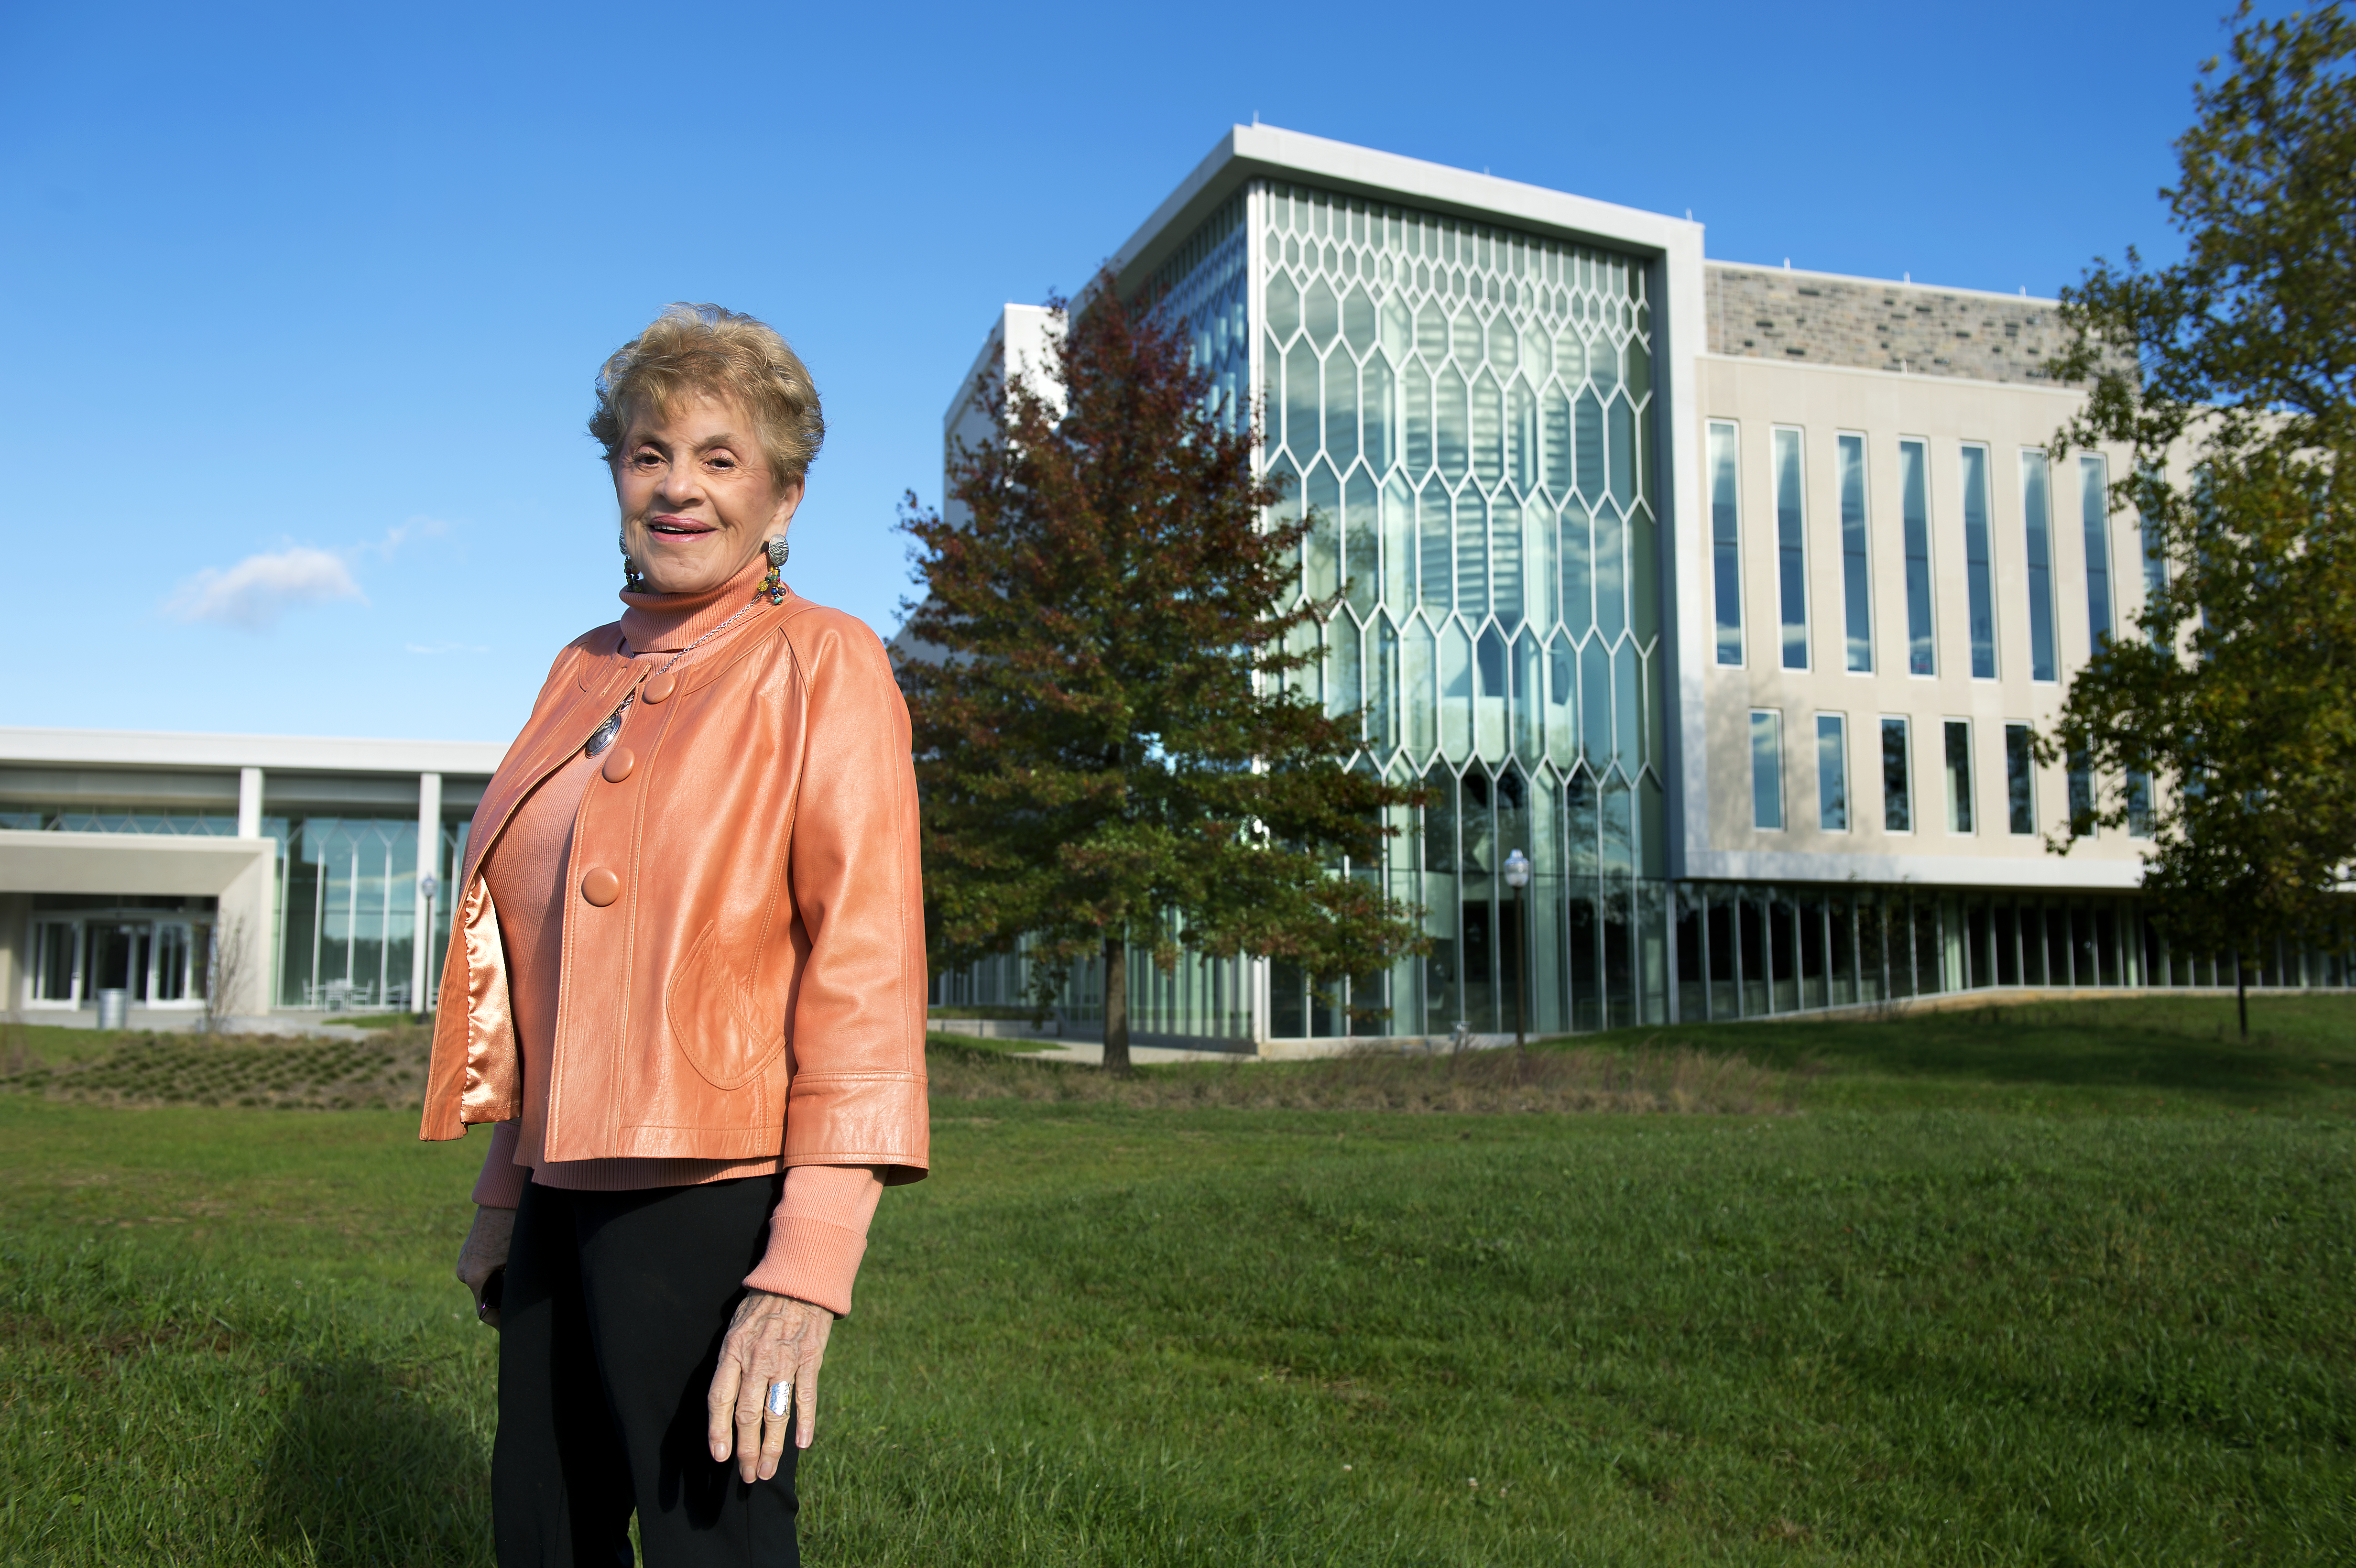 Patricia Buckley Moss stands outside the Moss Arts Center at Virginia Tech.